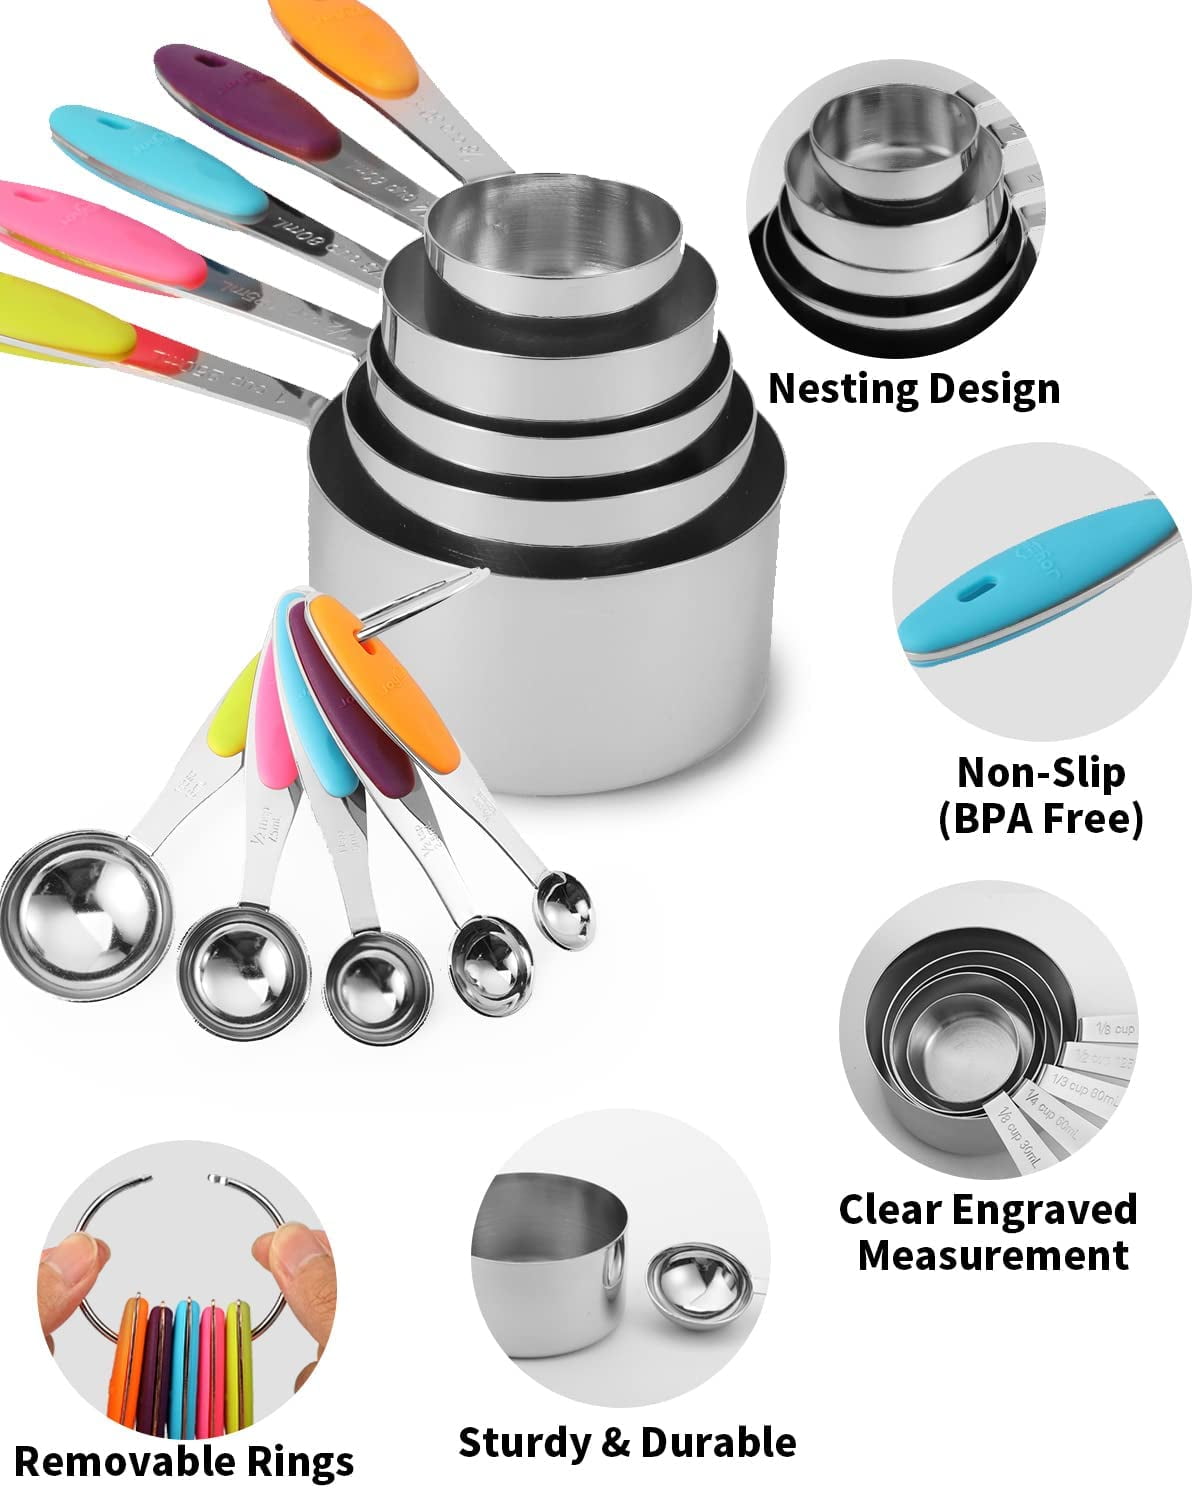 Classic Cuisine 10-Piece Stainless Steel with Silicone Measuring